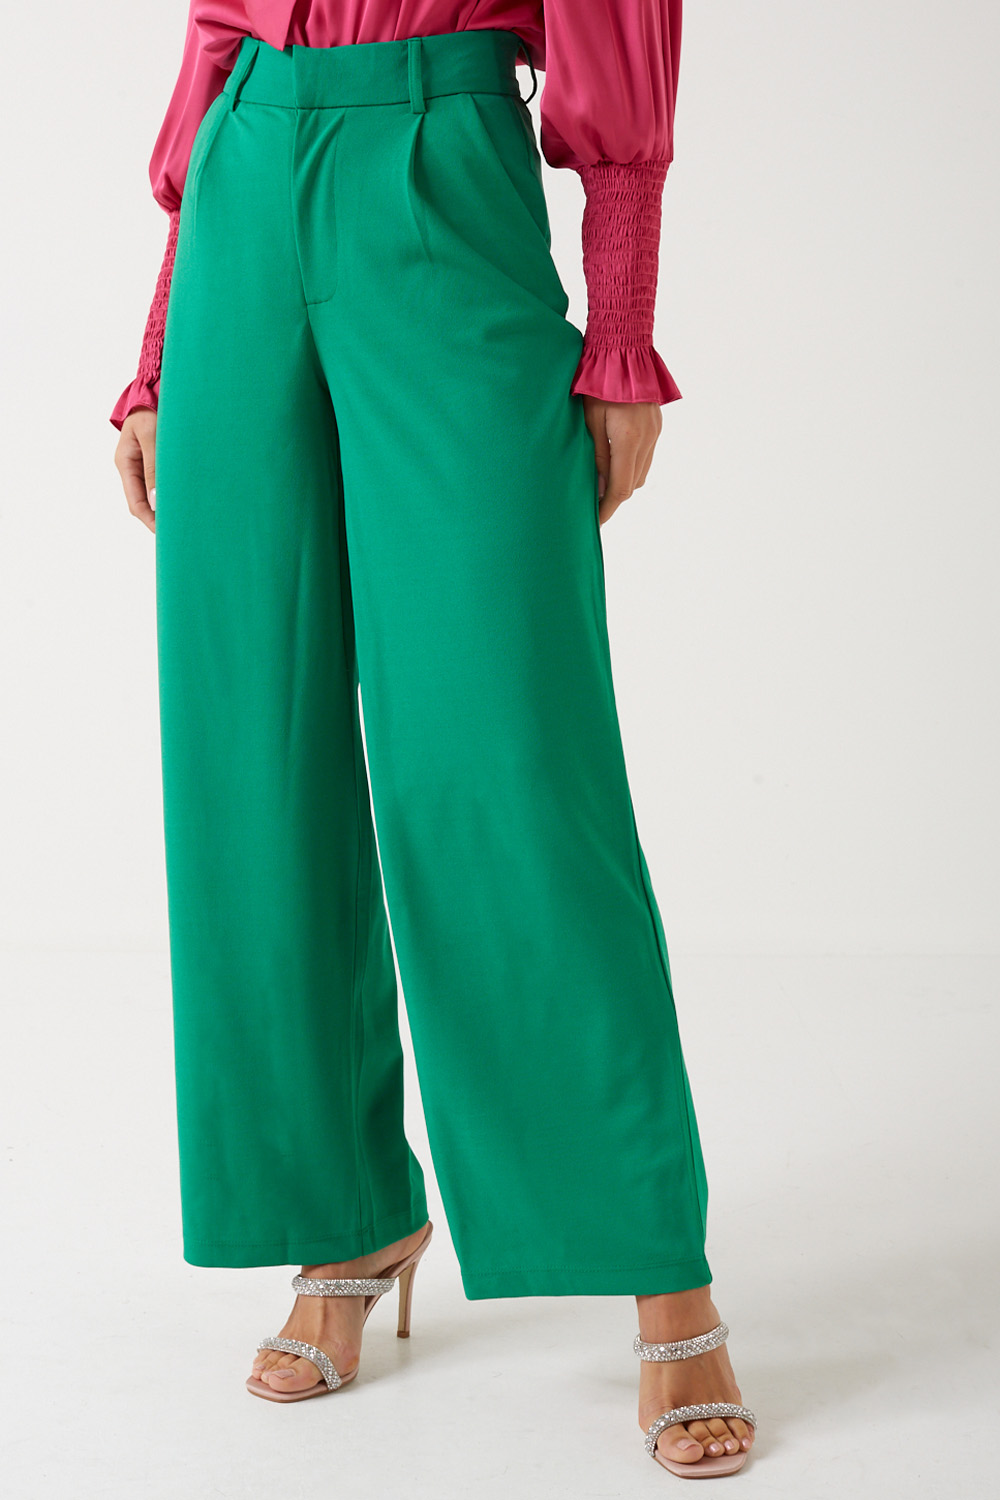 JDY Catia Wide Leg Trousers in Green | iCLOTHING - iCLOTHING